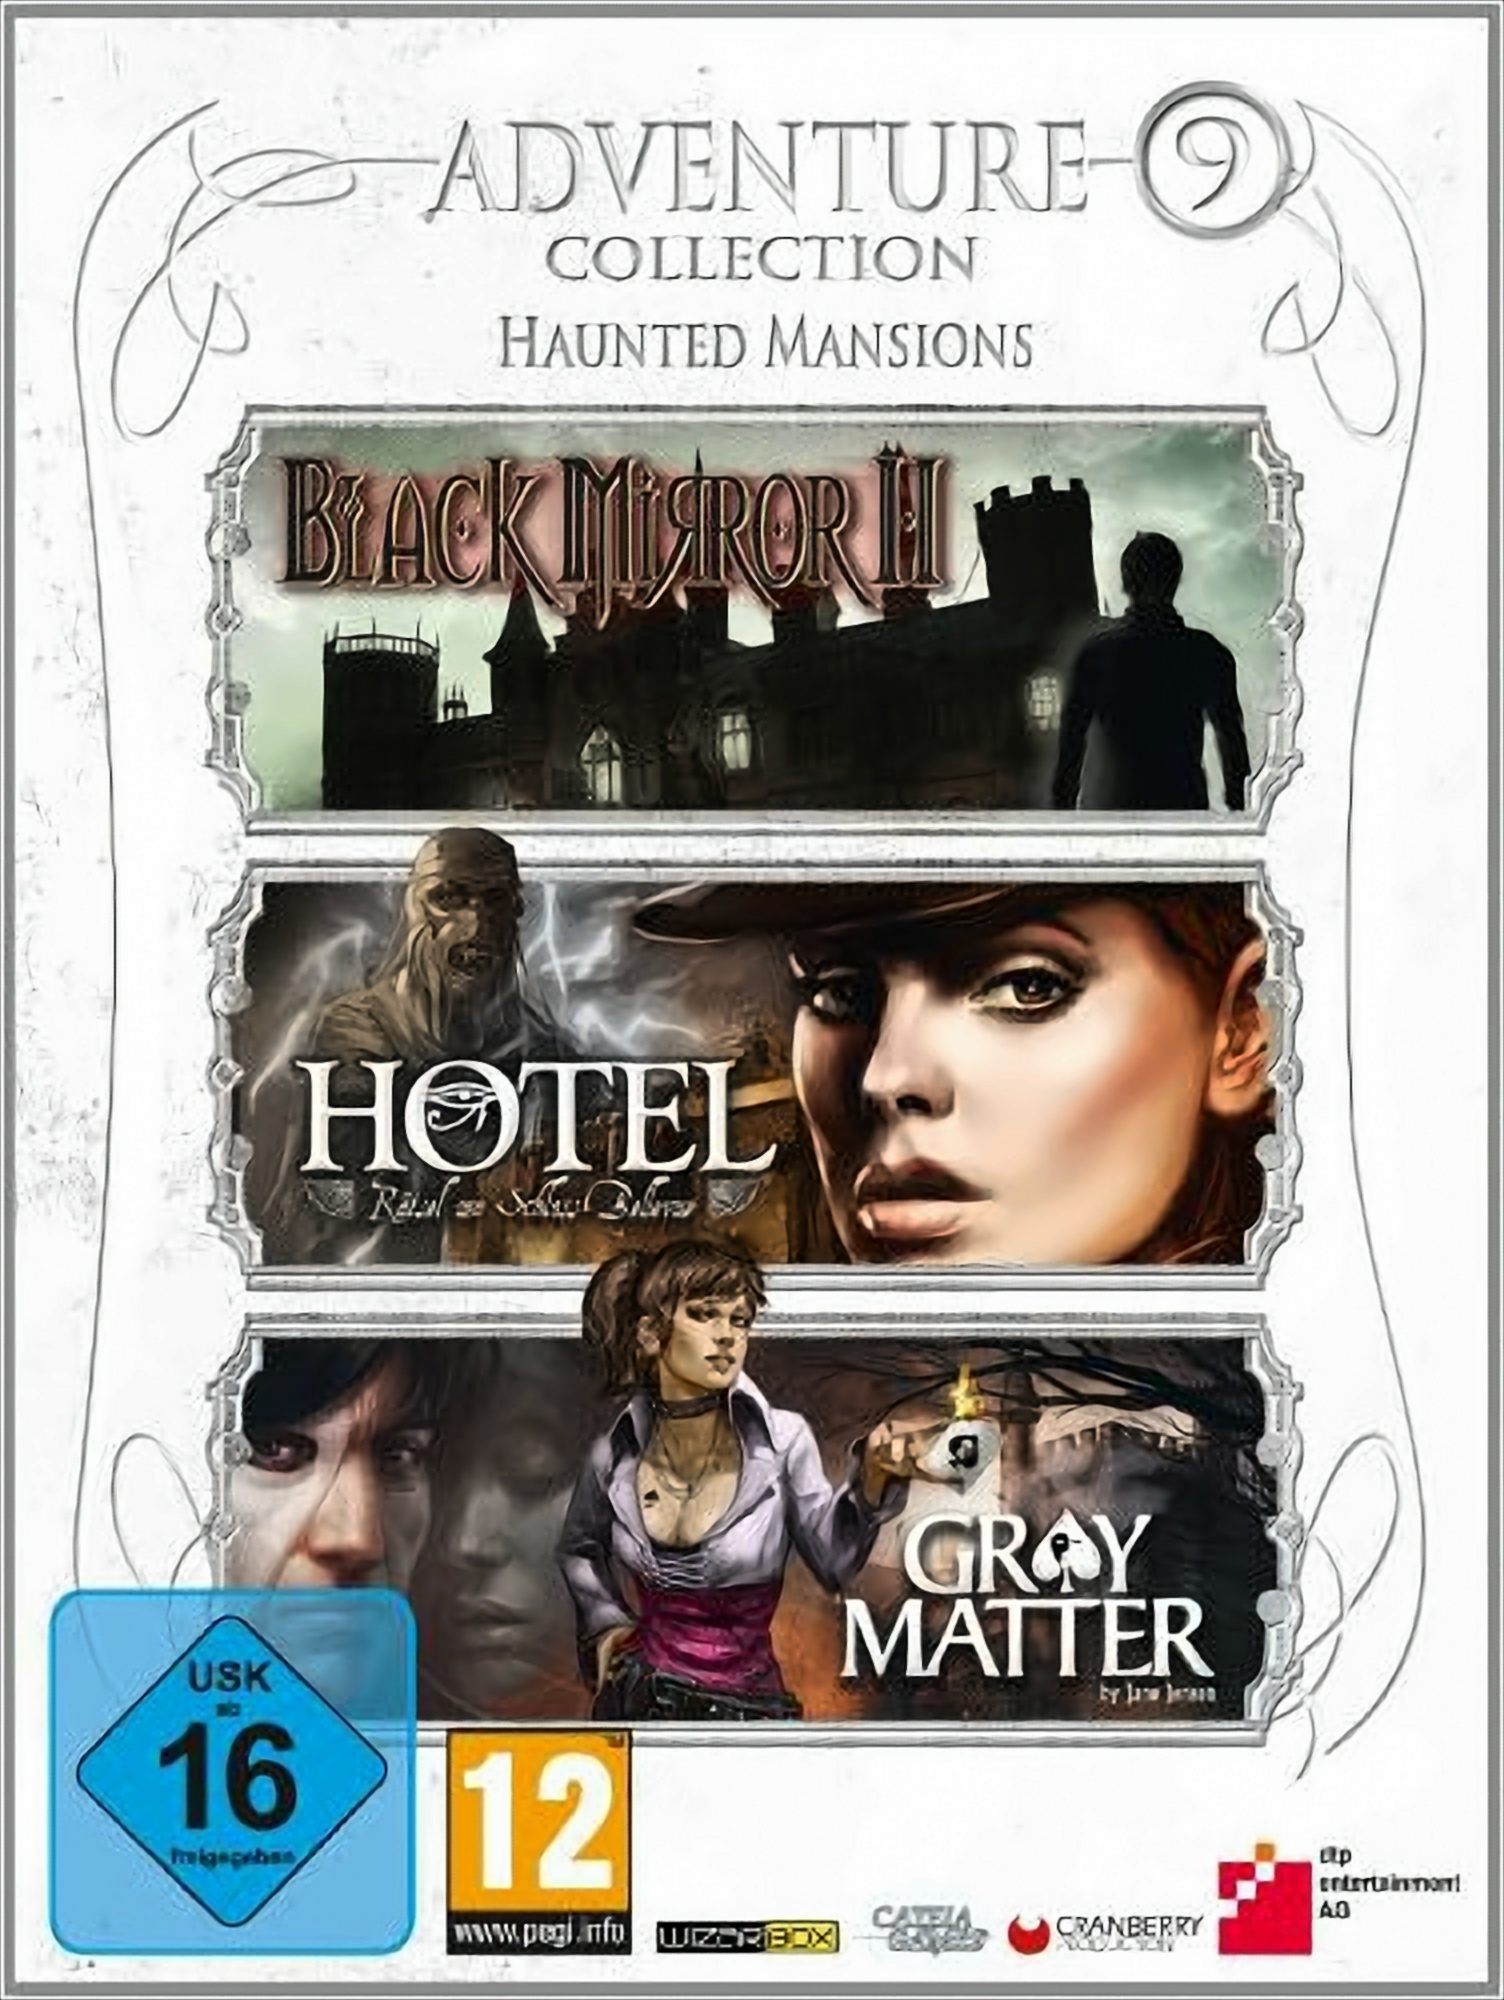 Mansions Adventure [PC] Collection Haunted - 9 -